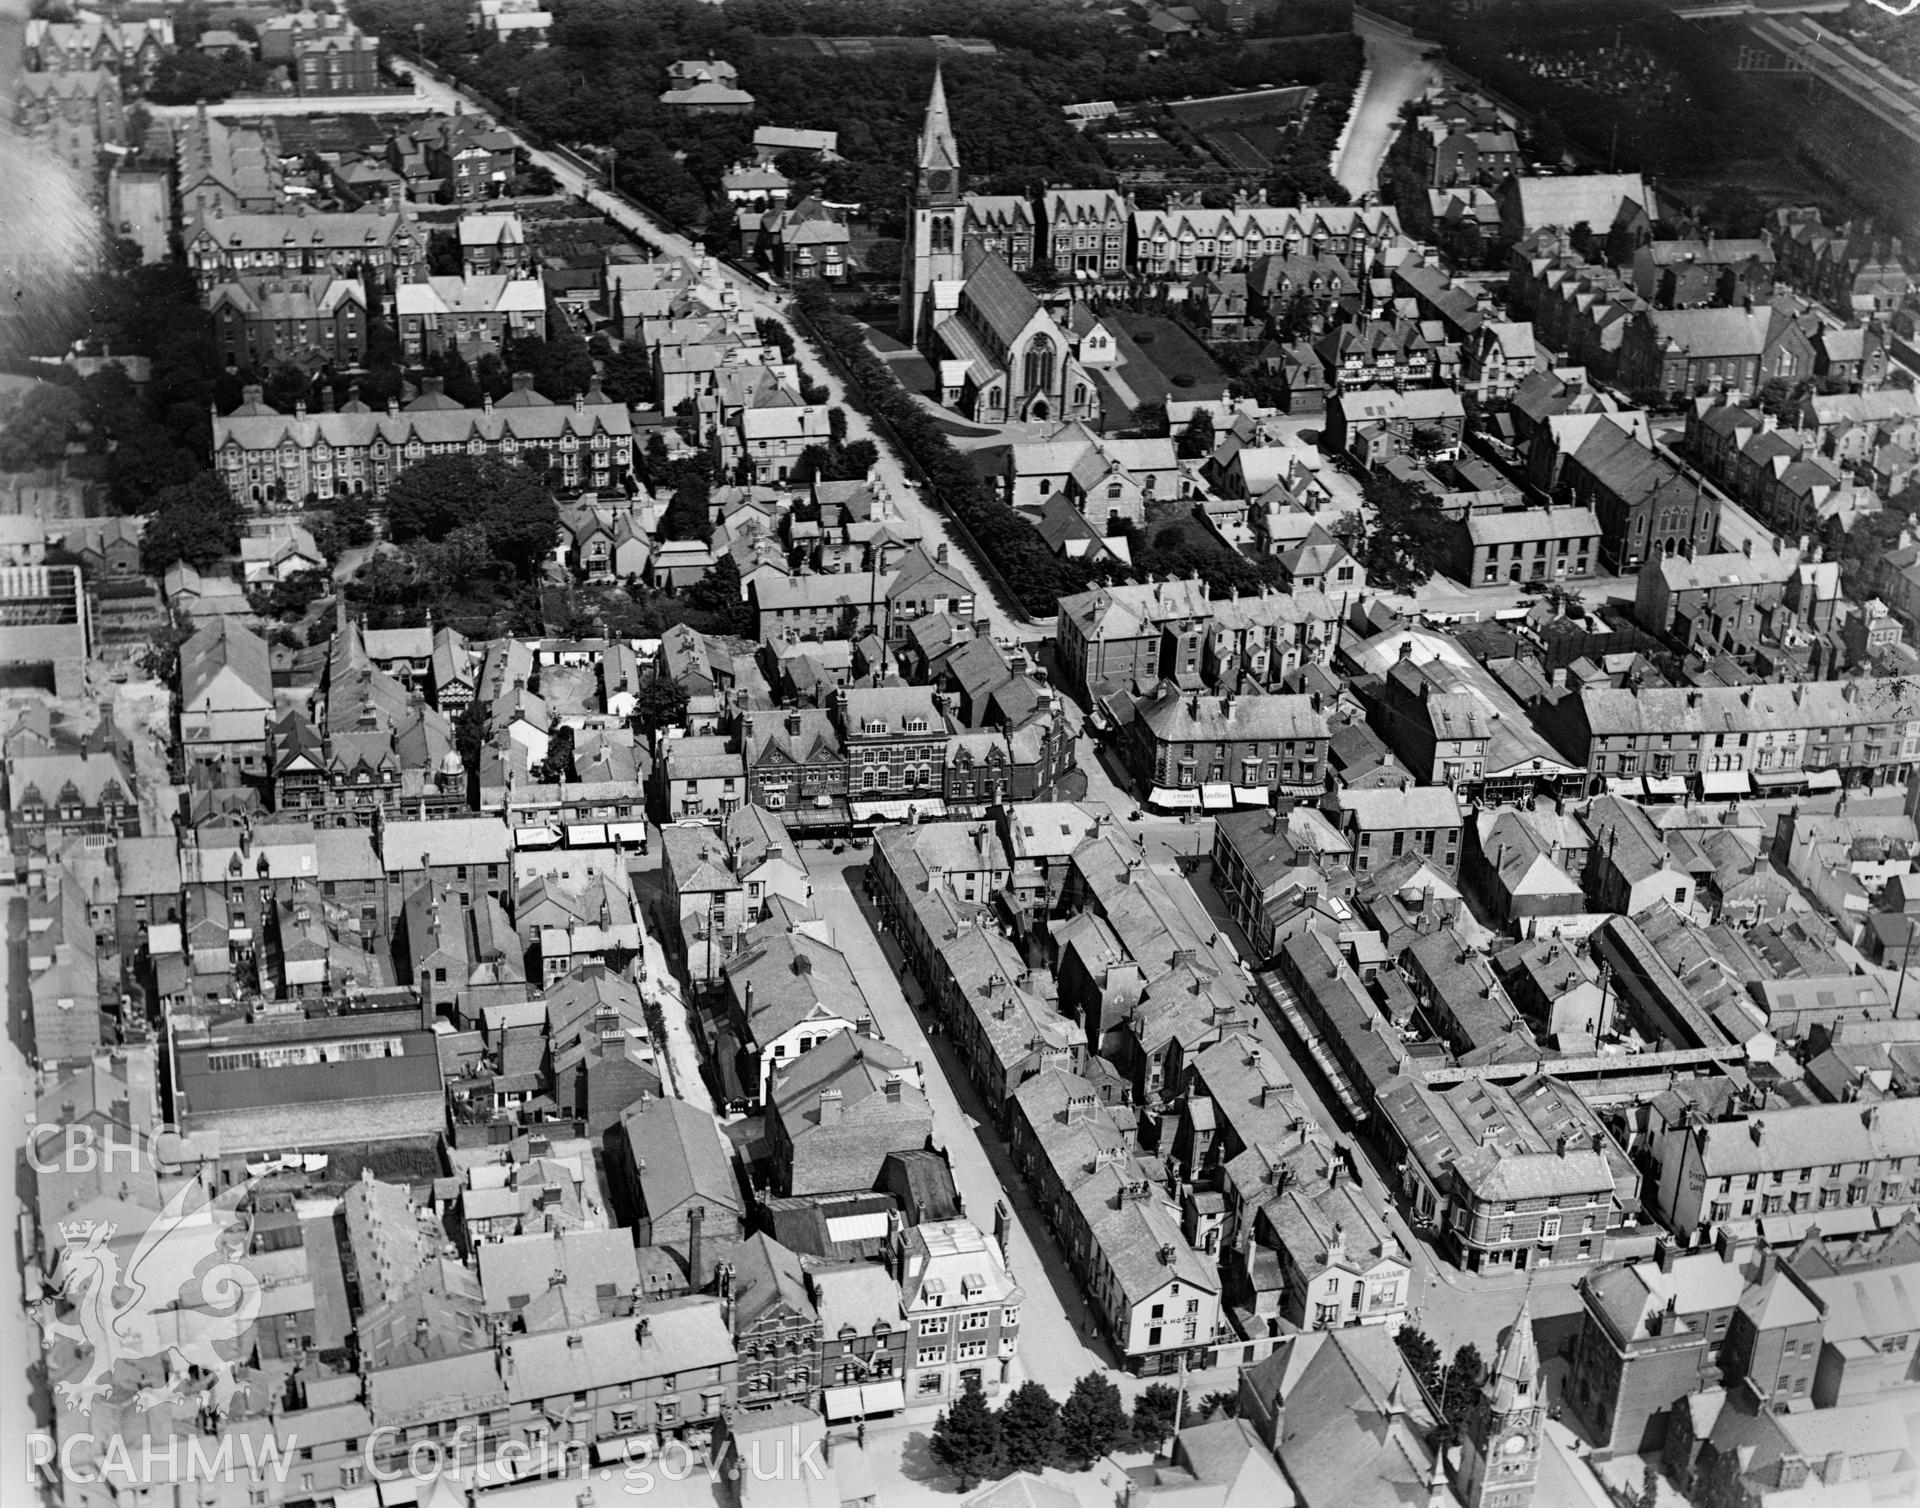 View of Rhyl showing town, oblique aerial view. 5?x4? black and white glass plate negative.